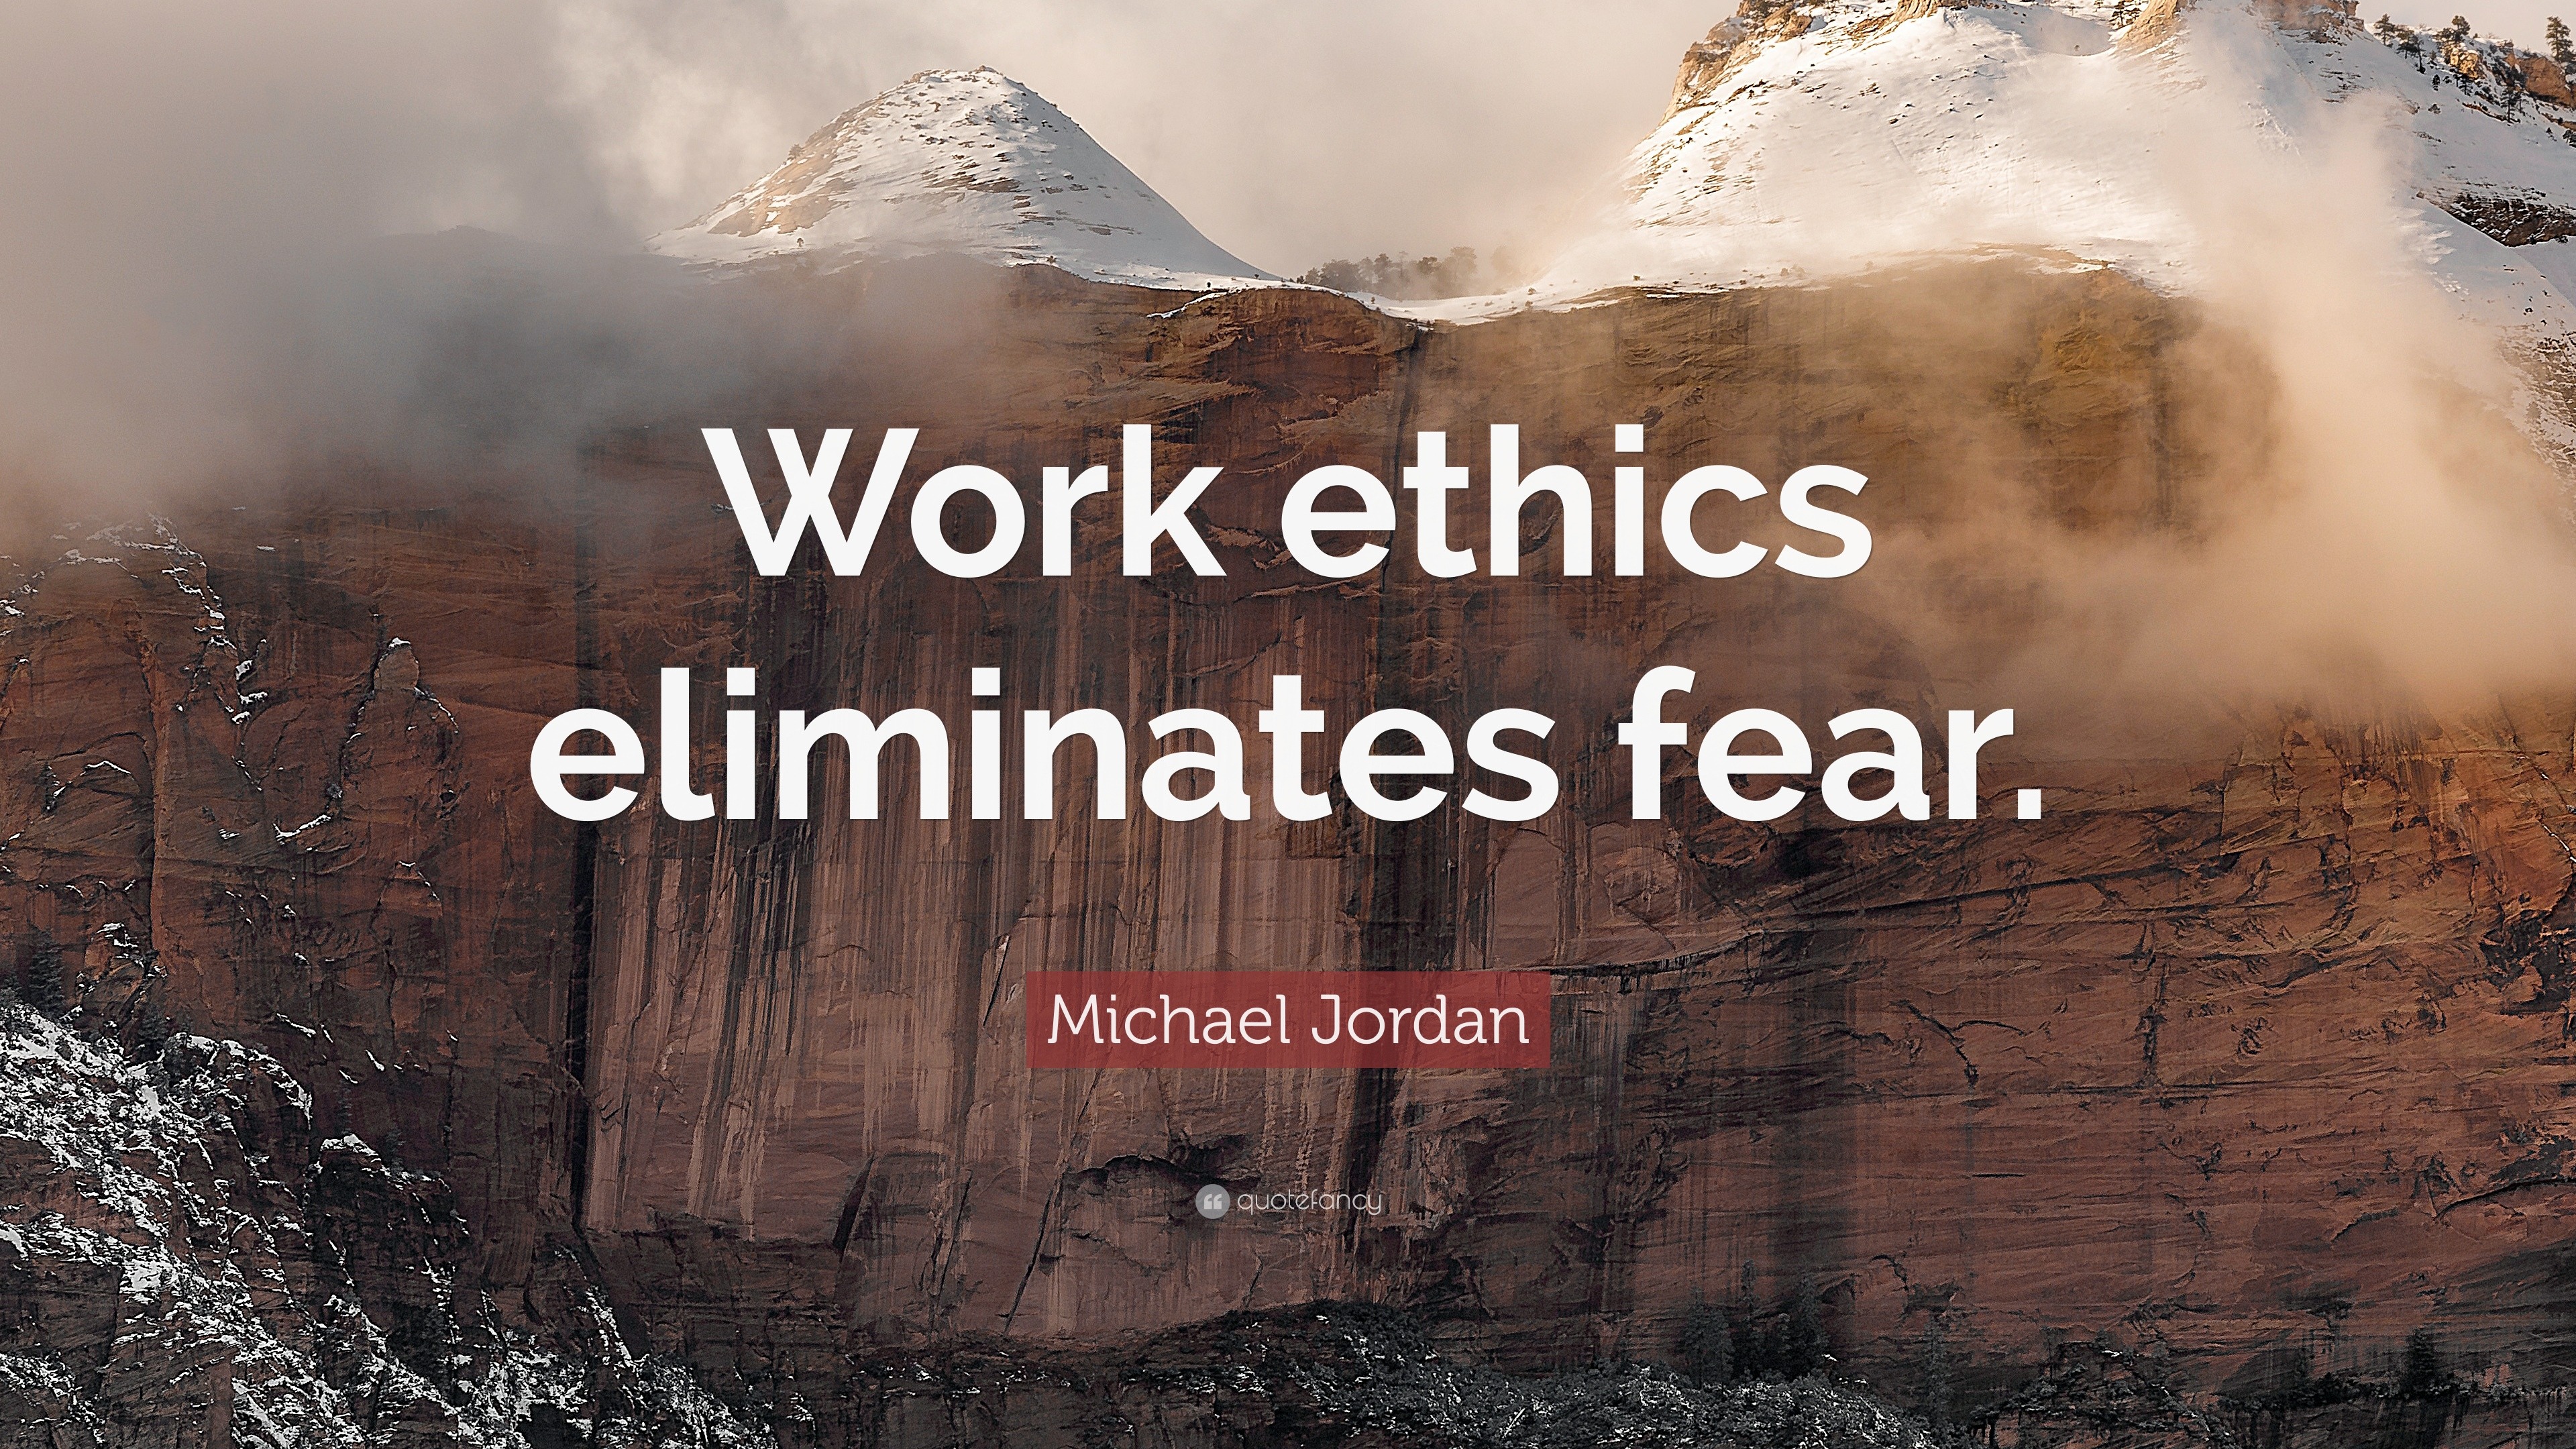 Quotes About Work Ethic